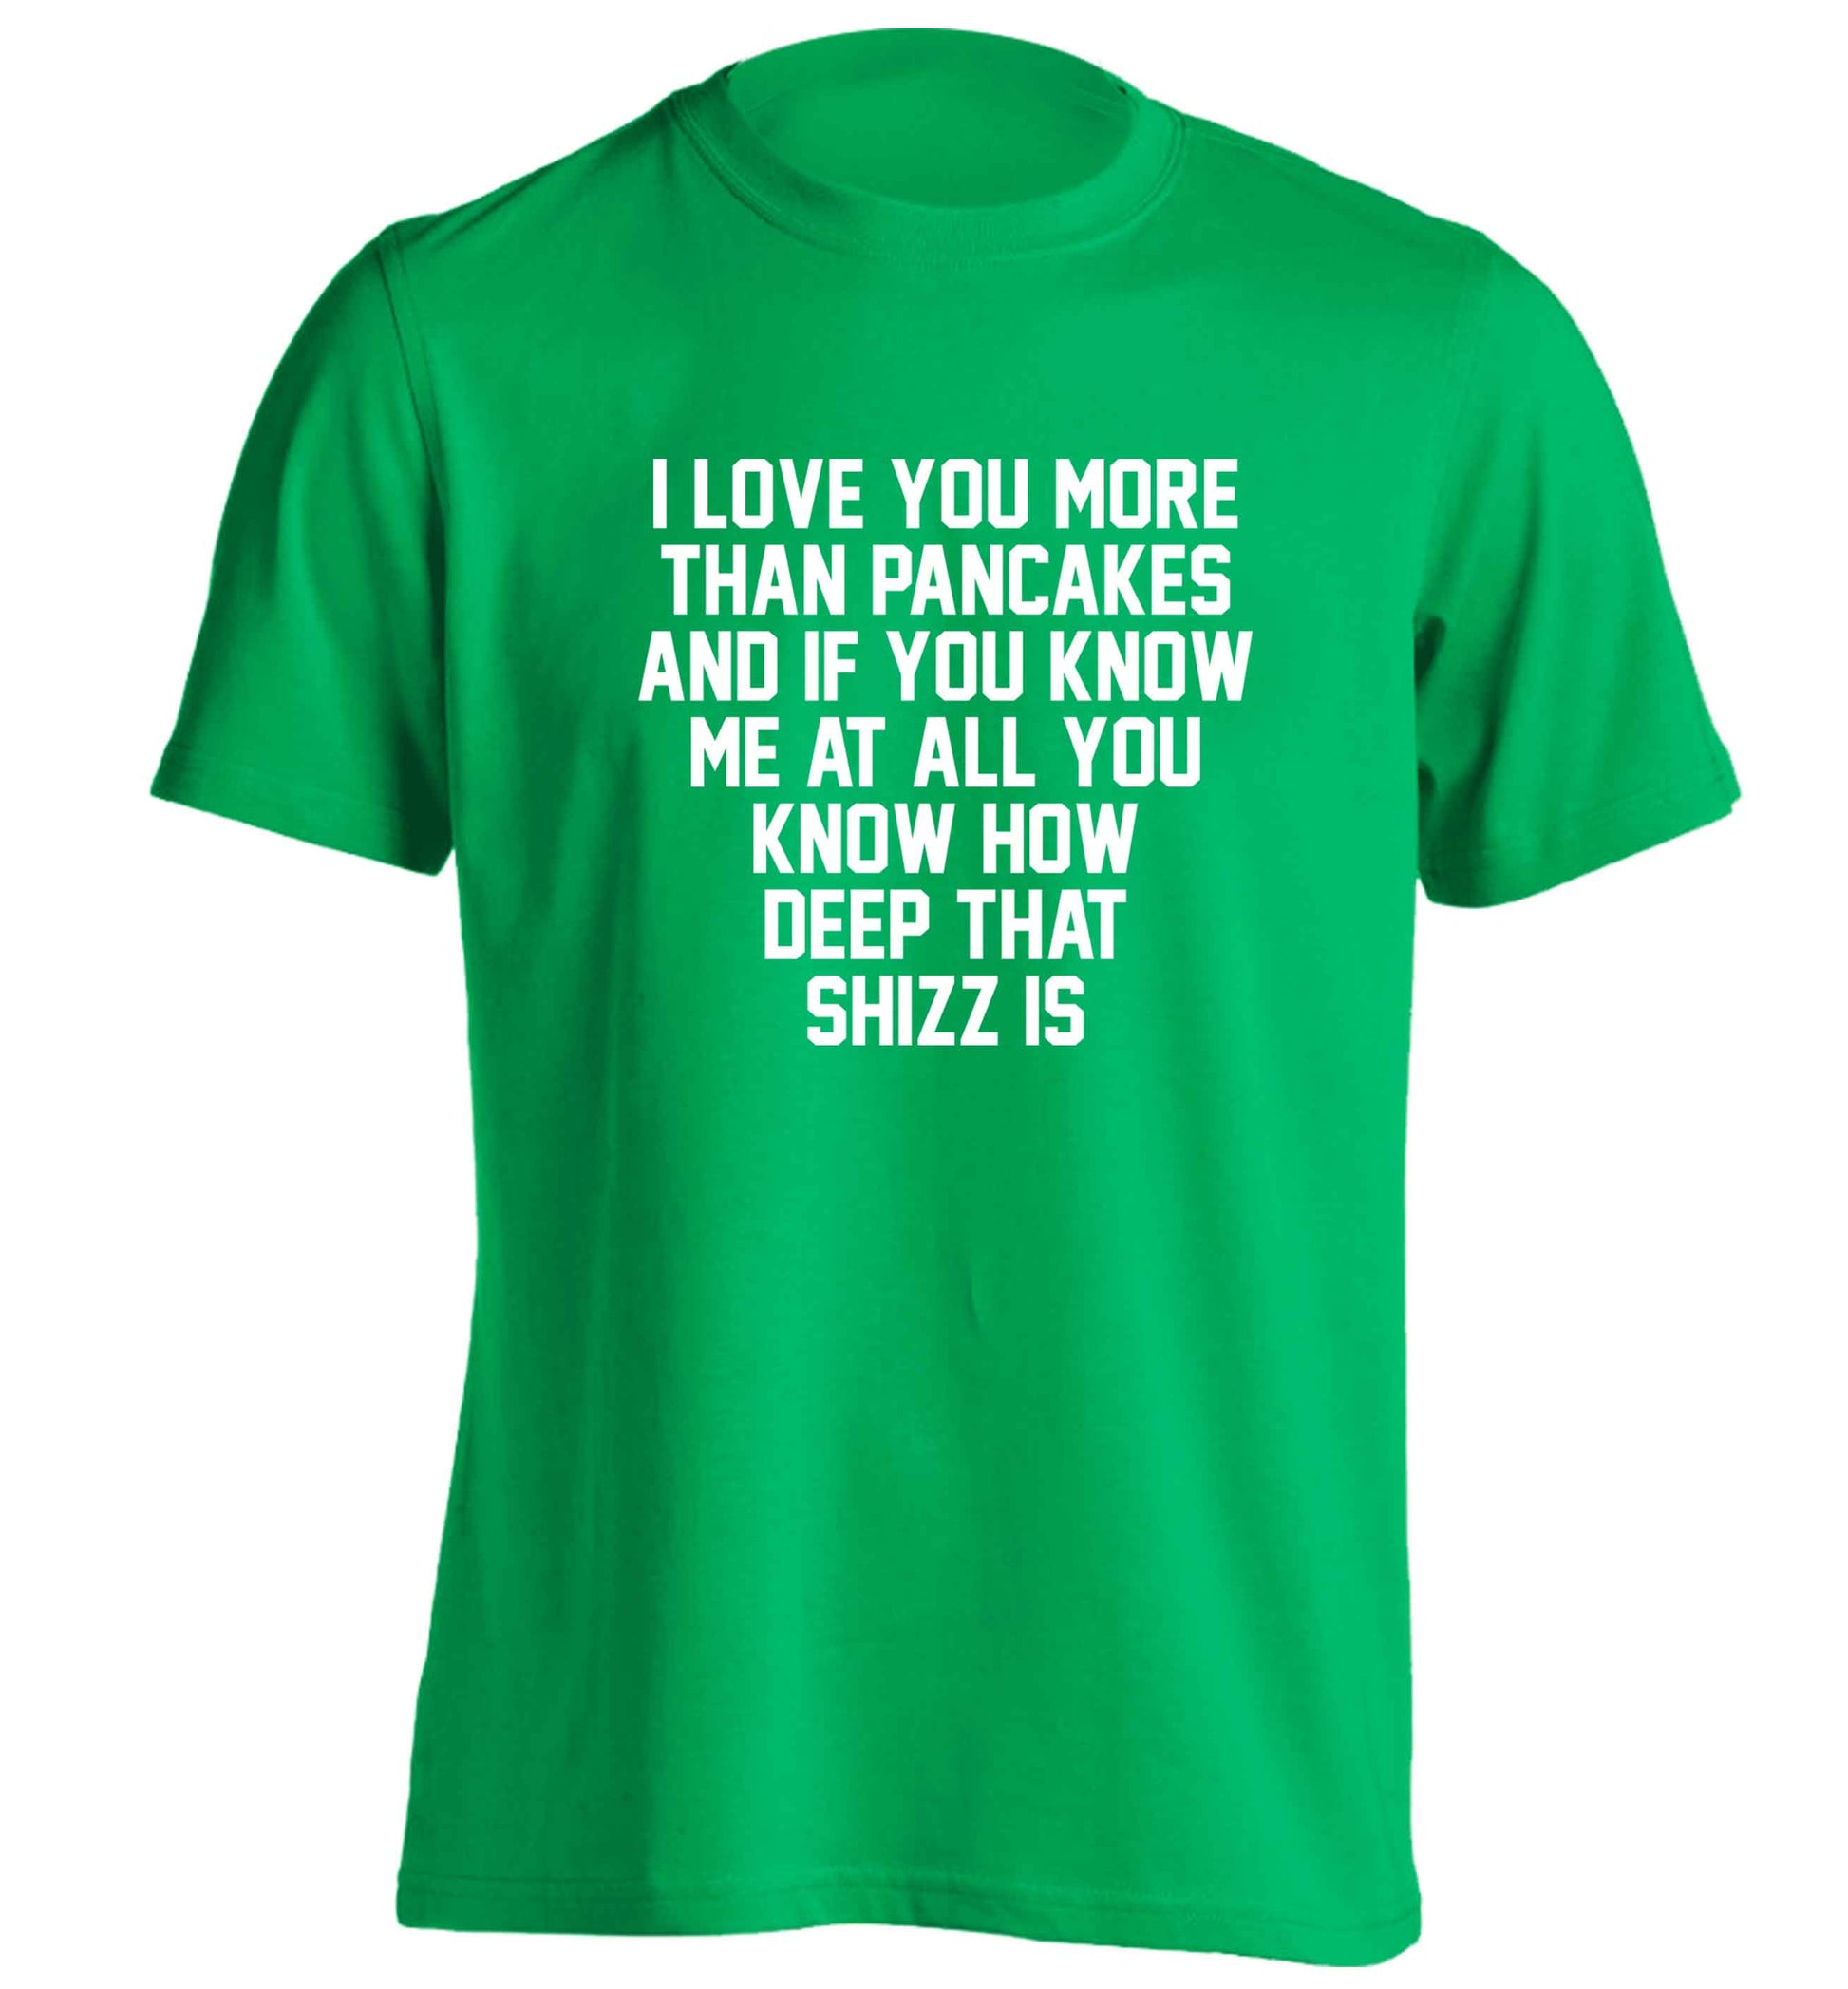 I love you more than pancakes and if you know me at all you know how deep that shizz is adults unisex green Tshirt 2XL